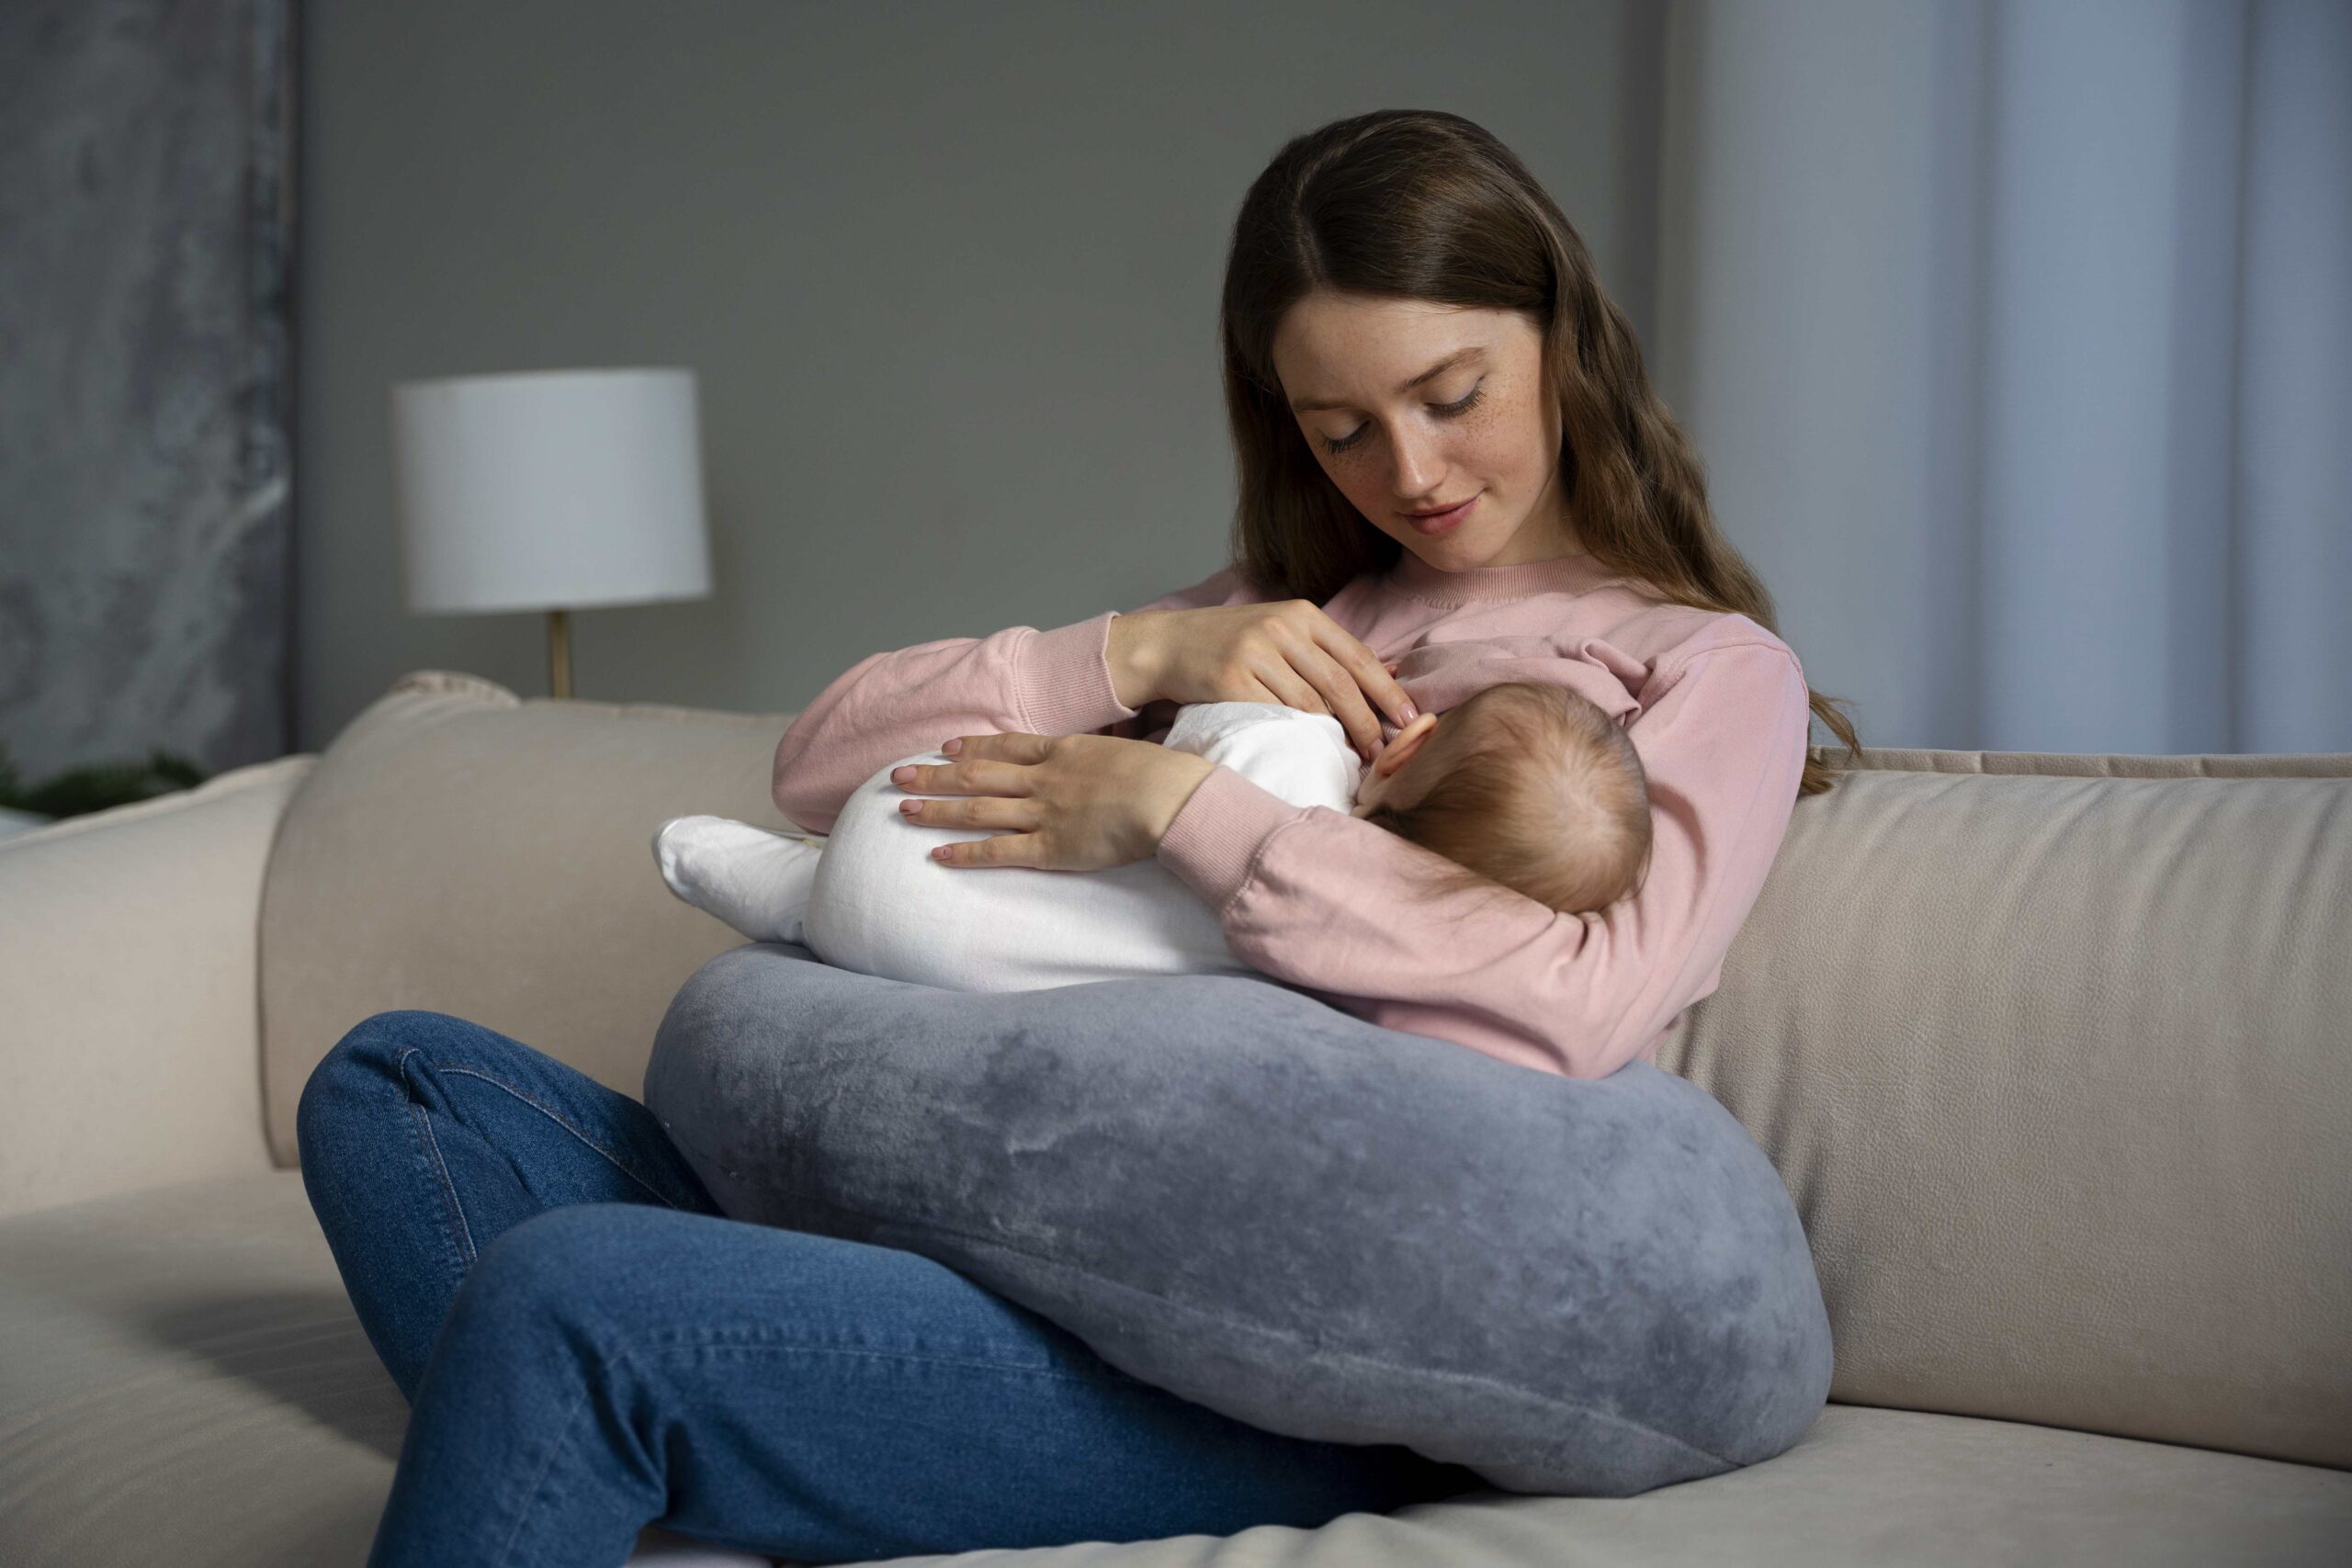 Breastfeeding Positions: Finding Comfort and Connection with Your Baby